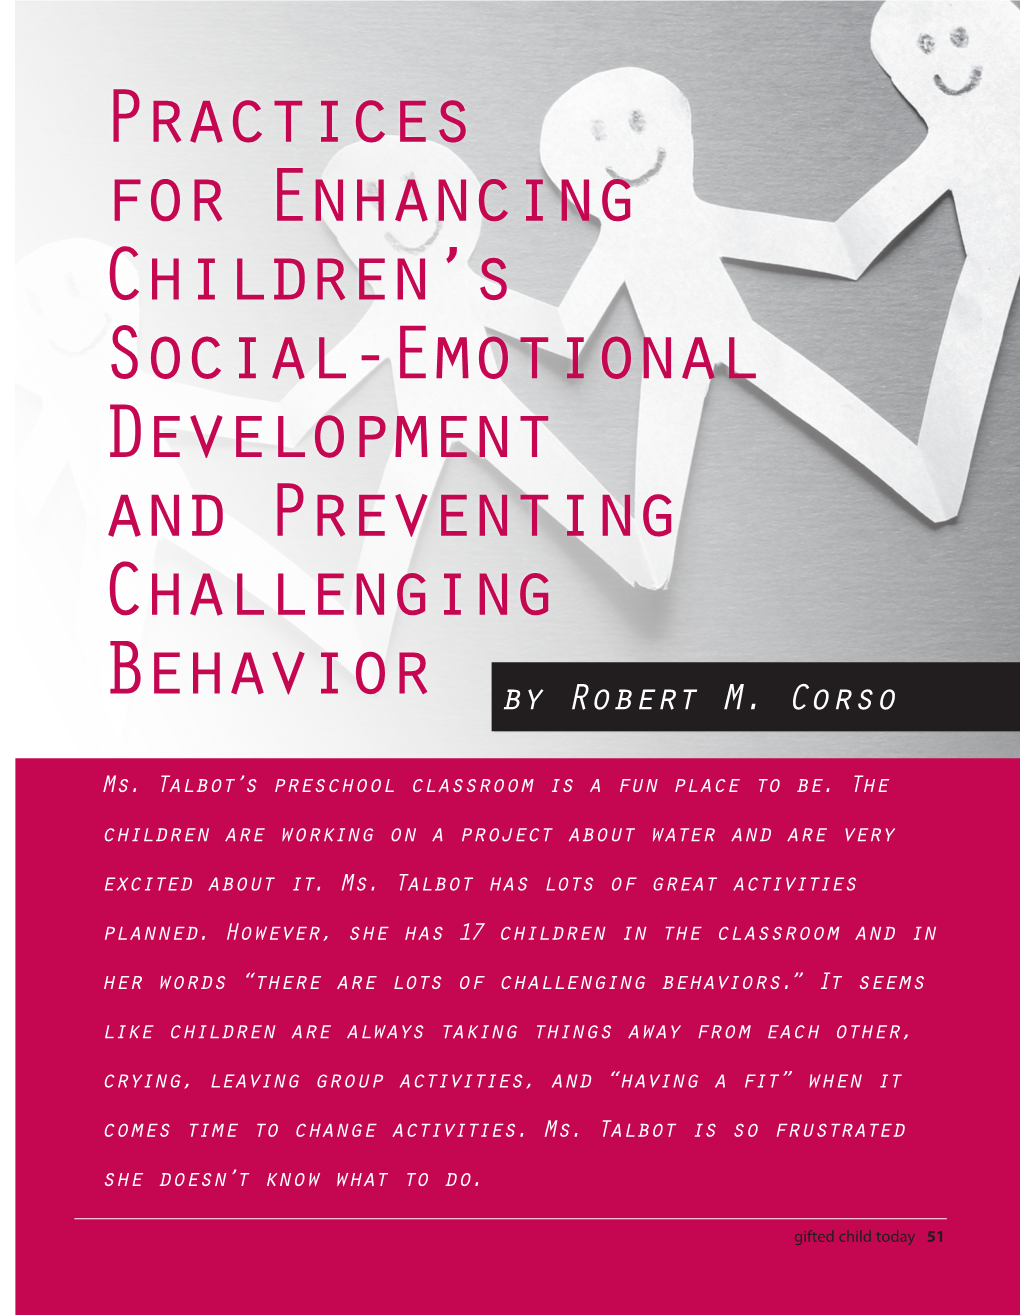 Practices for Enhancing Children's Social-Emotional Development And